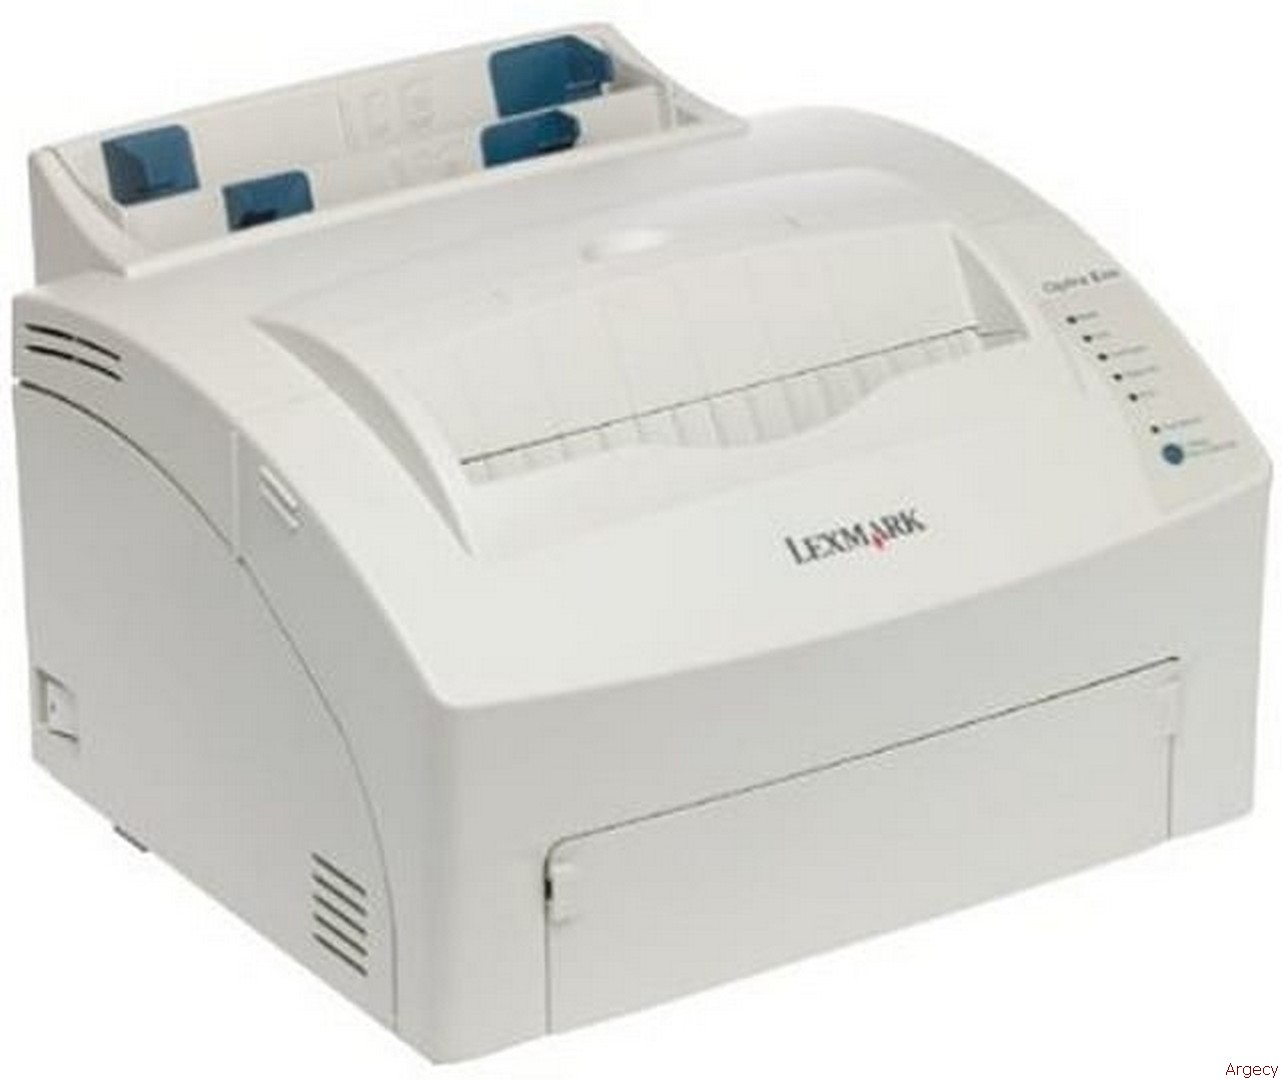 Lexmark E310 4044-001 - purchase from Argecy